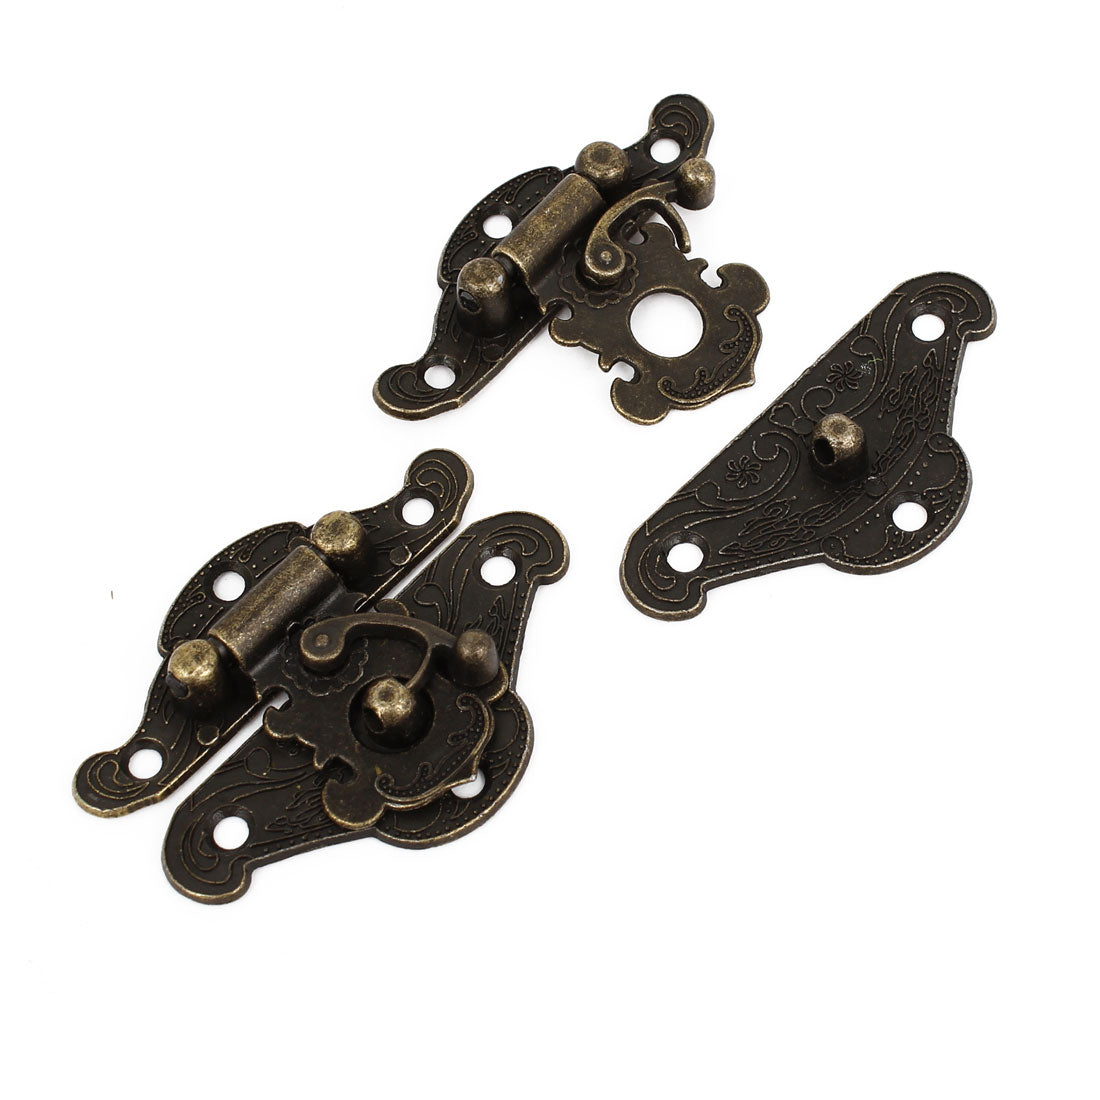 uxcell Uxcell 2 Pcs Dollhouse Antique Carved Wood Jewelry Box Latch Sets Case Hasp Pad Chest Lock Locking Hook Hinge Bronze Tone 1.9" Long